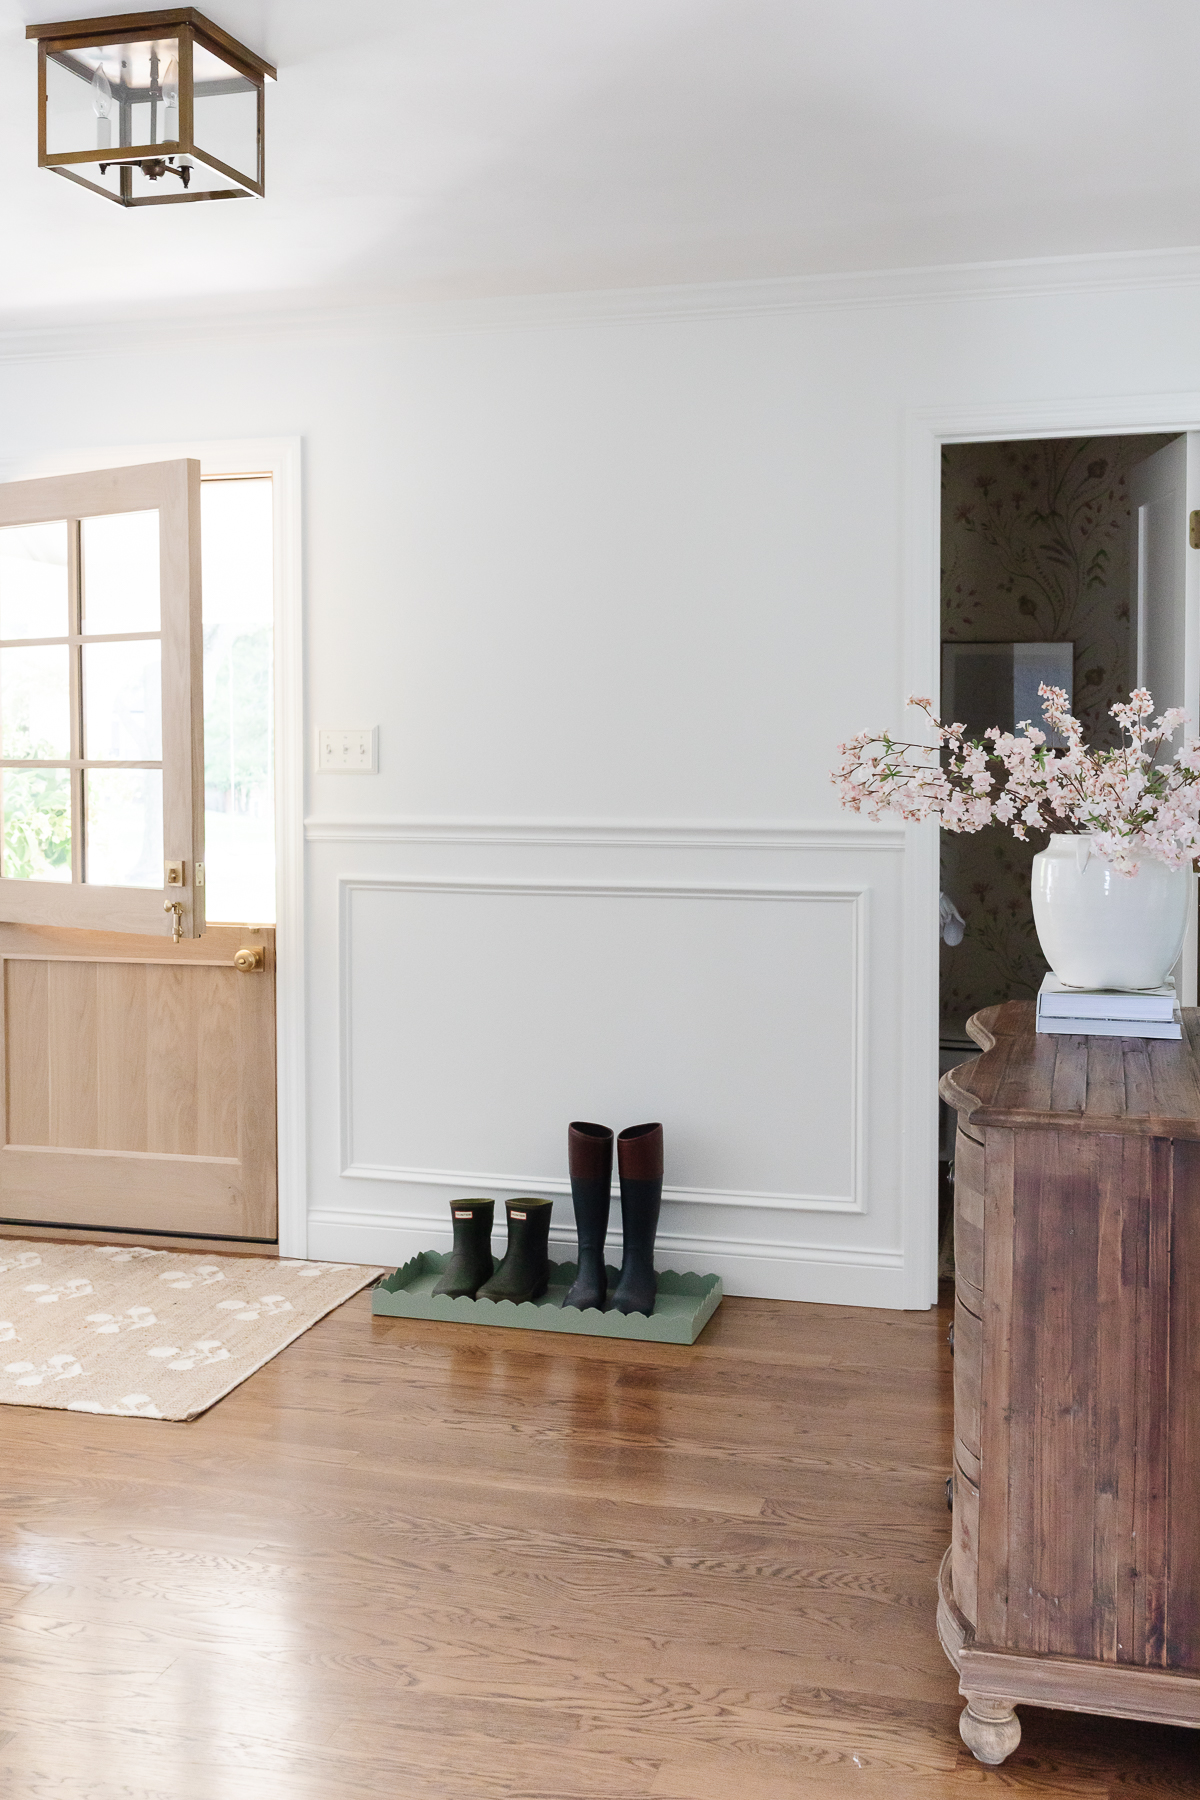 A white foyer design with a Dutch door, box trim moulding on the walls and hardwood floors.